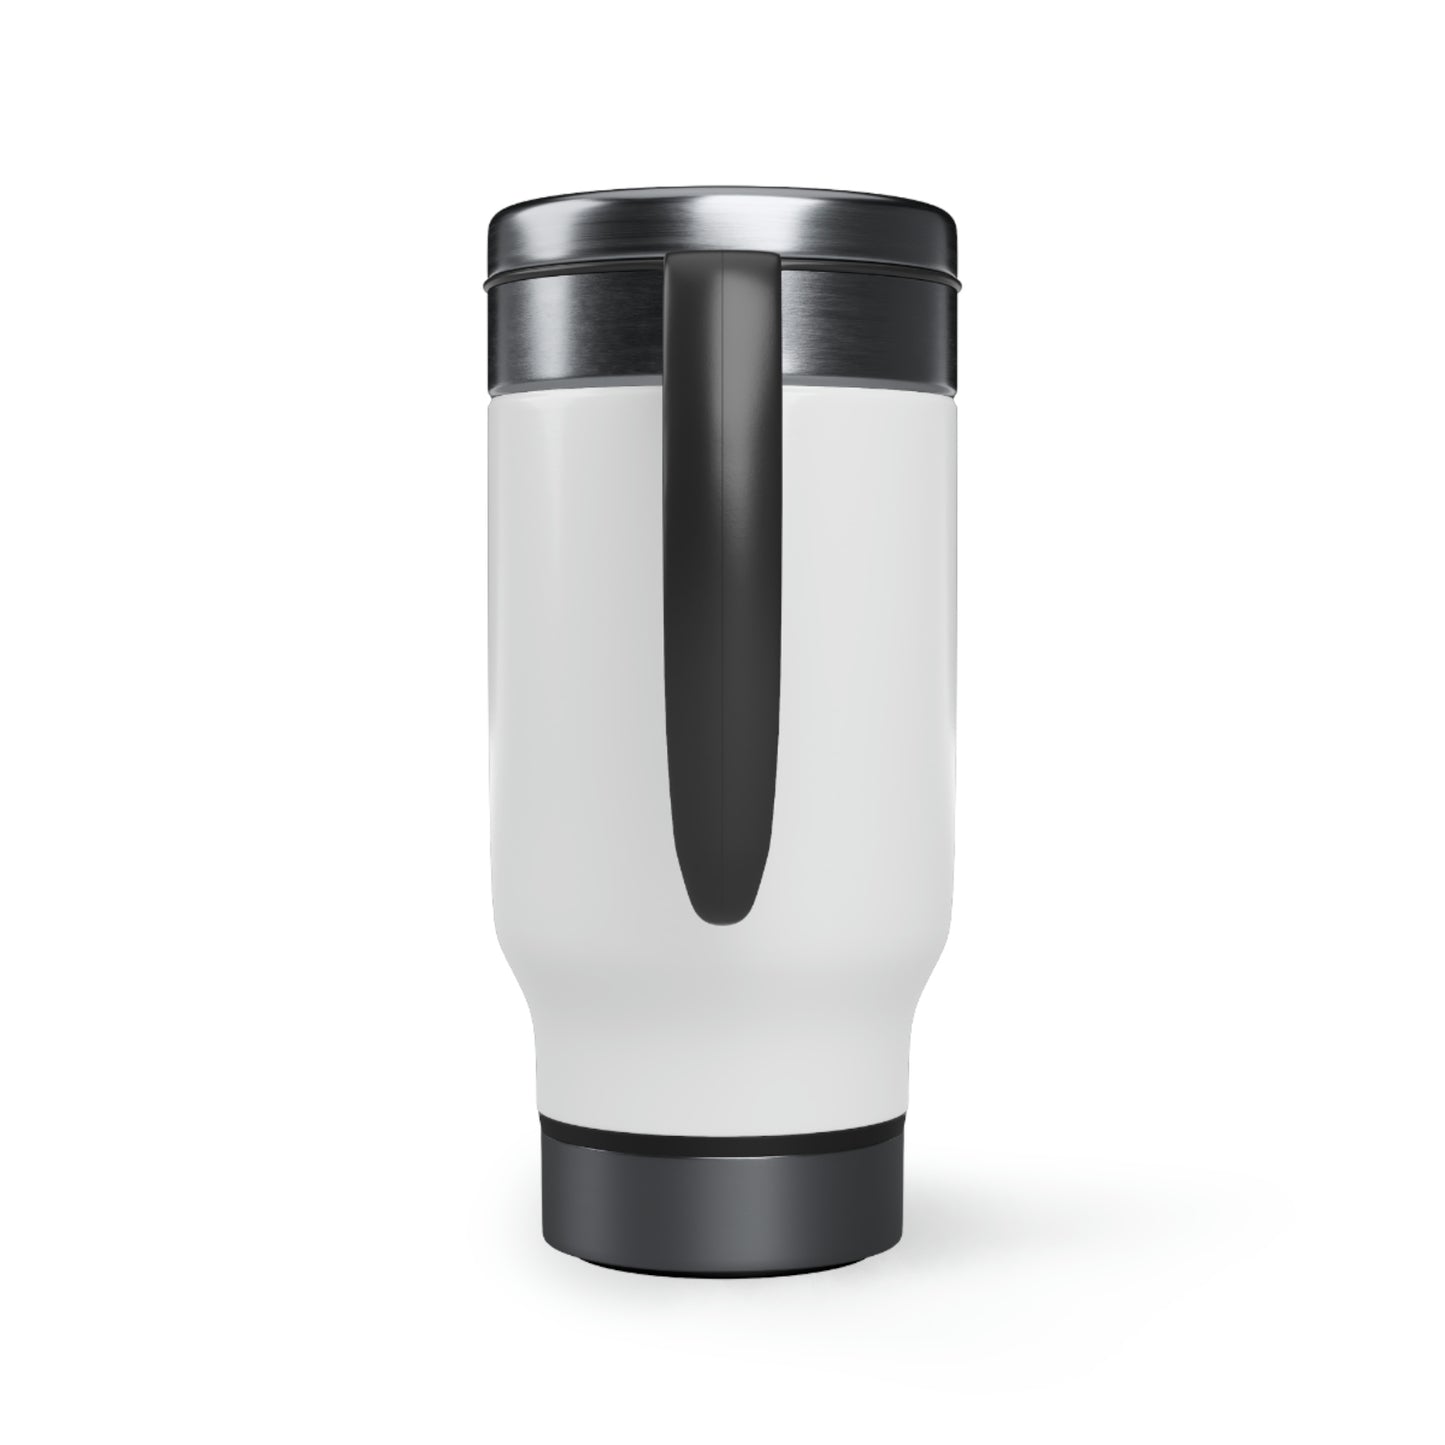 Stags Logo 3 Stainless Steel Travel Mug with Handle, 14oz  #H10-02C